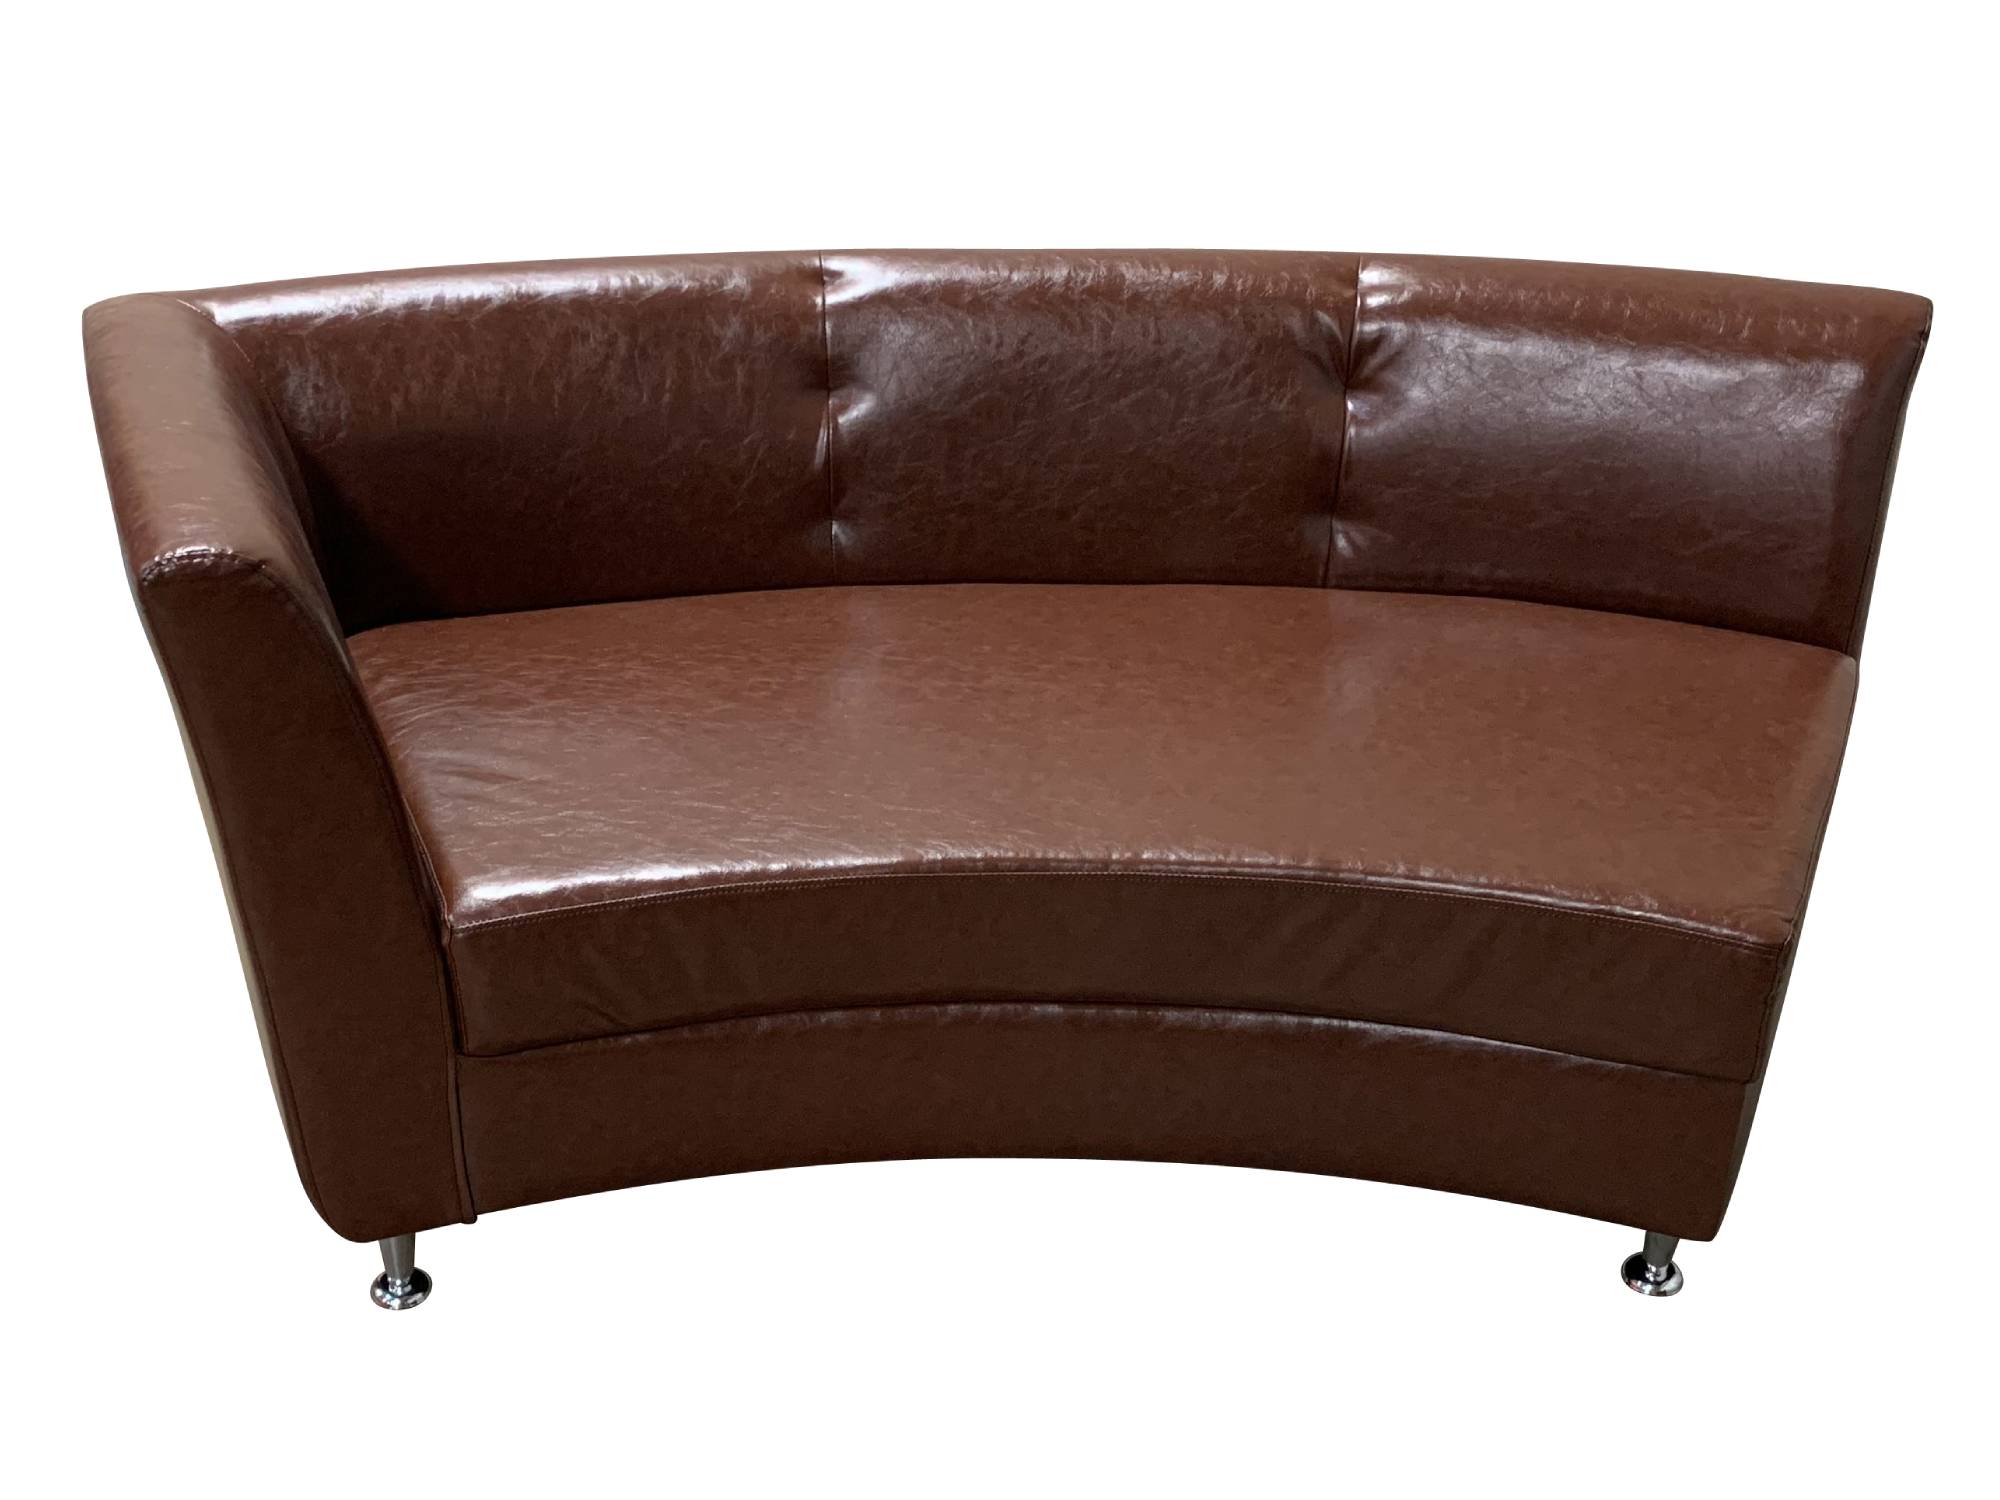 LUXURY RIGHT ARM SOFA SECTION - BROWN